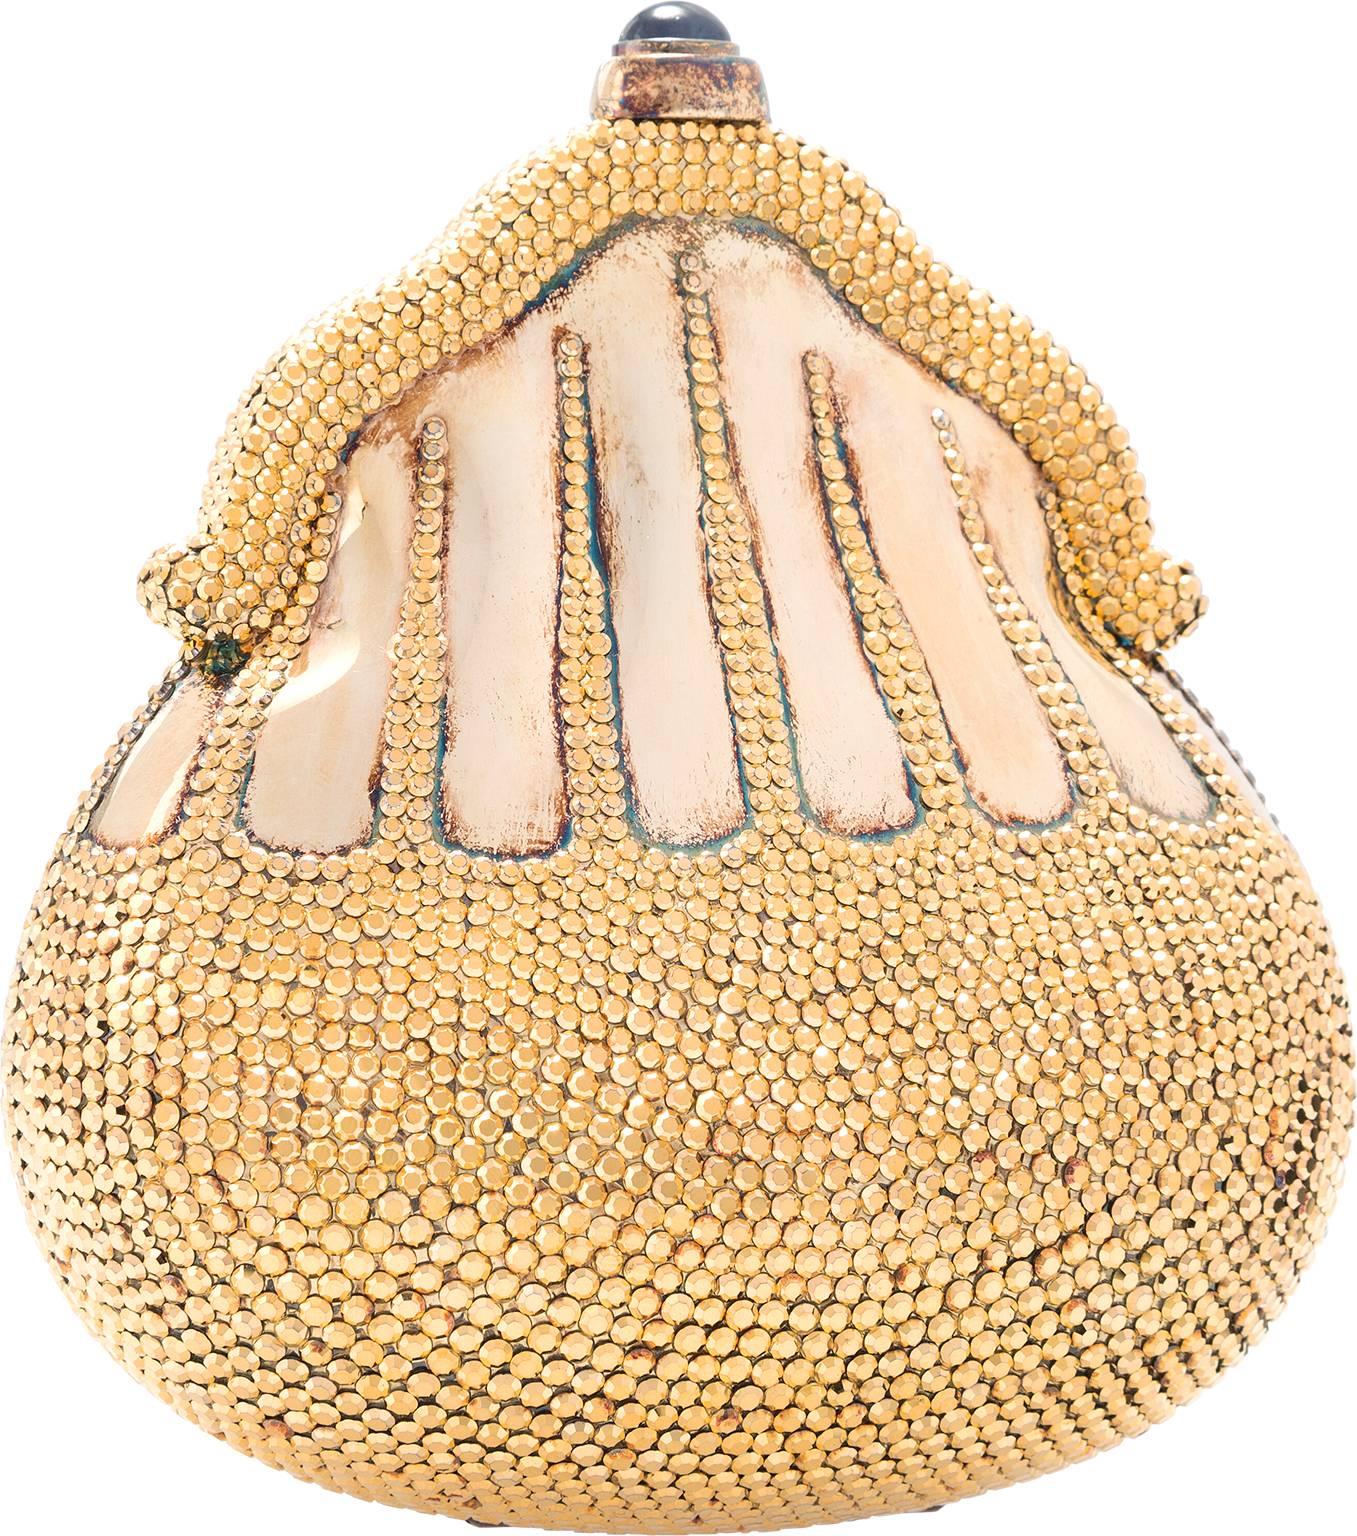 The original minaudiere, the chatelaine minaudiere evening bag is Judith Leiber's first design, originally done in 1967. This chatelaine bag is an incredible collectors piece. Done in a limited edition of just one hundred and fifty bags, this